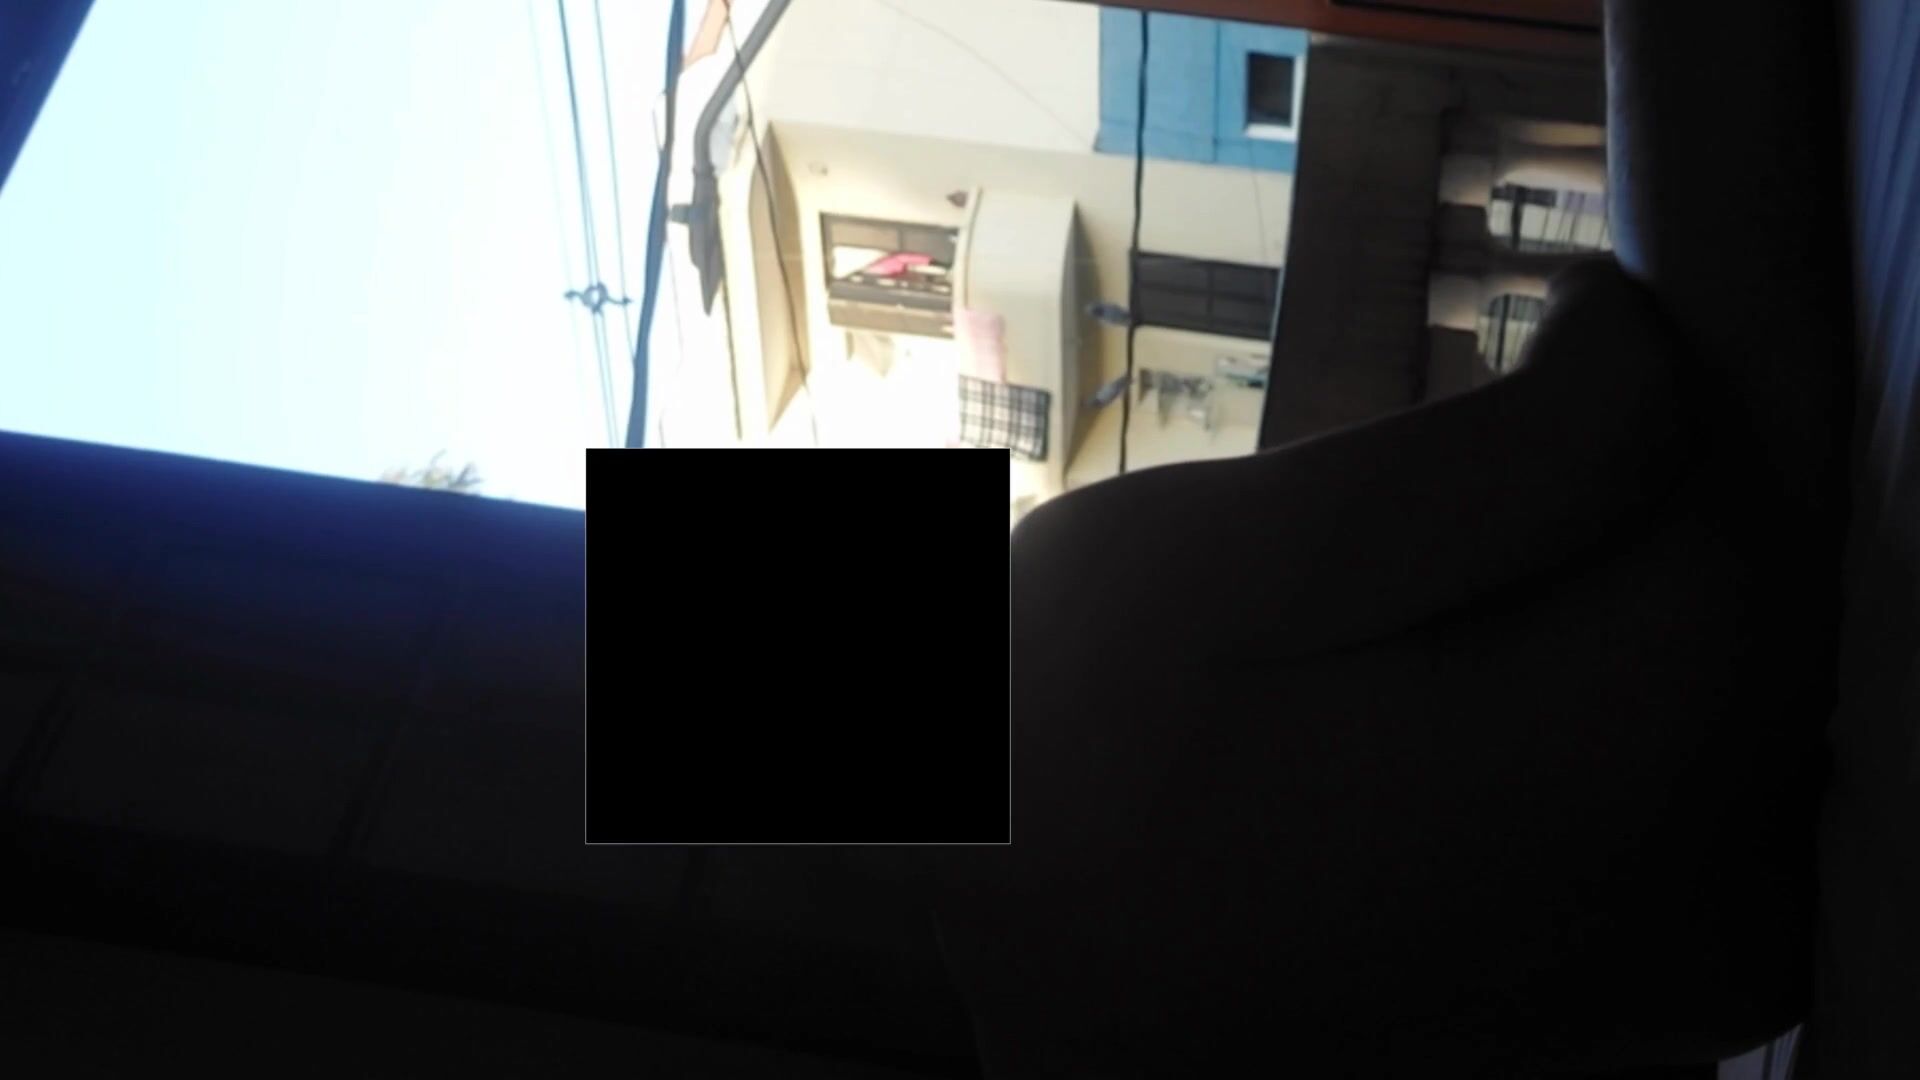 Neighbor Cant Stop To Watch Me Naked At Window image image